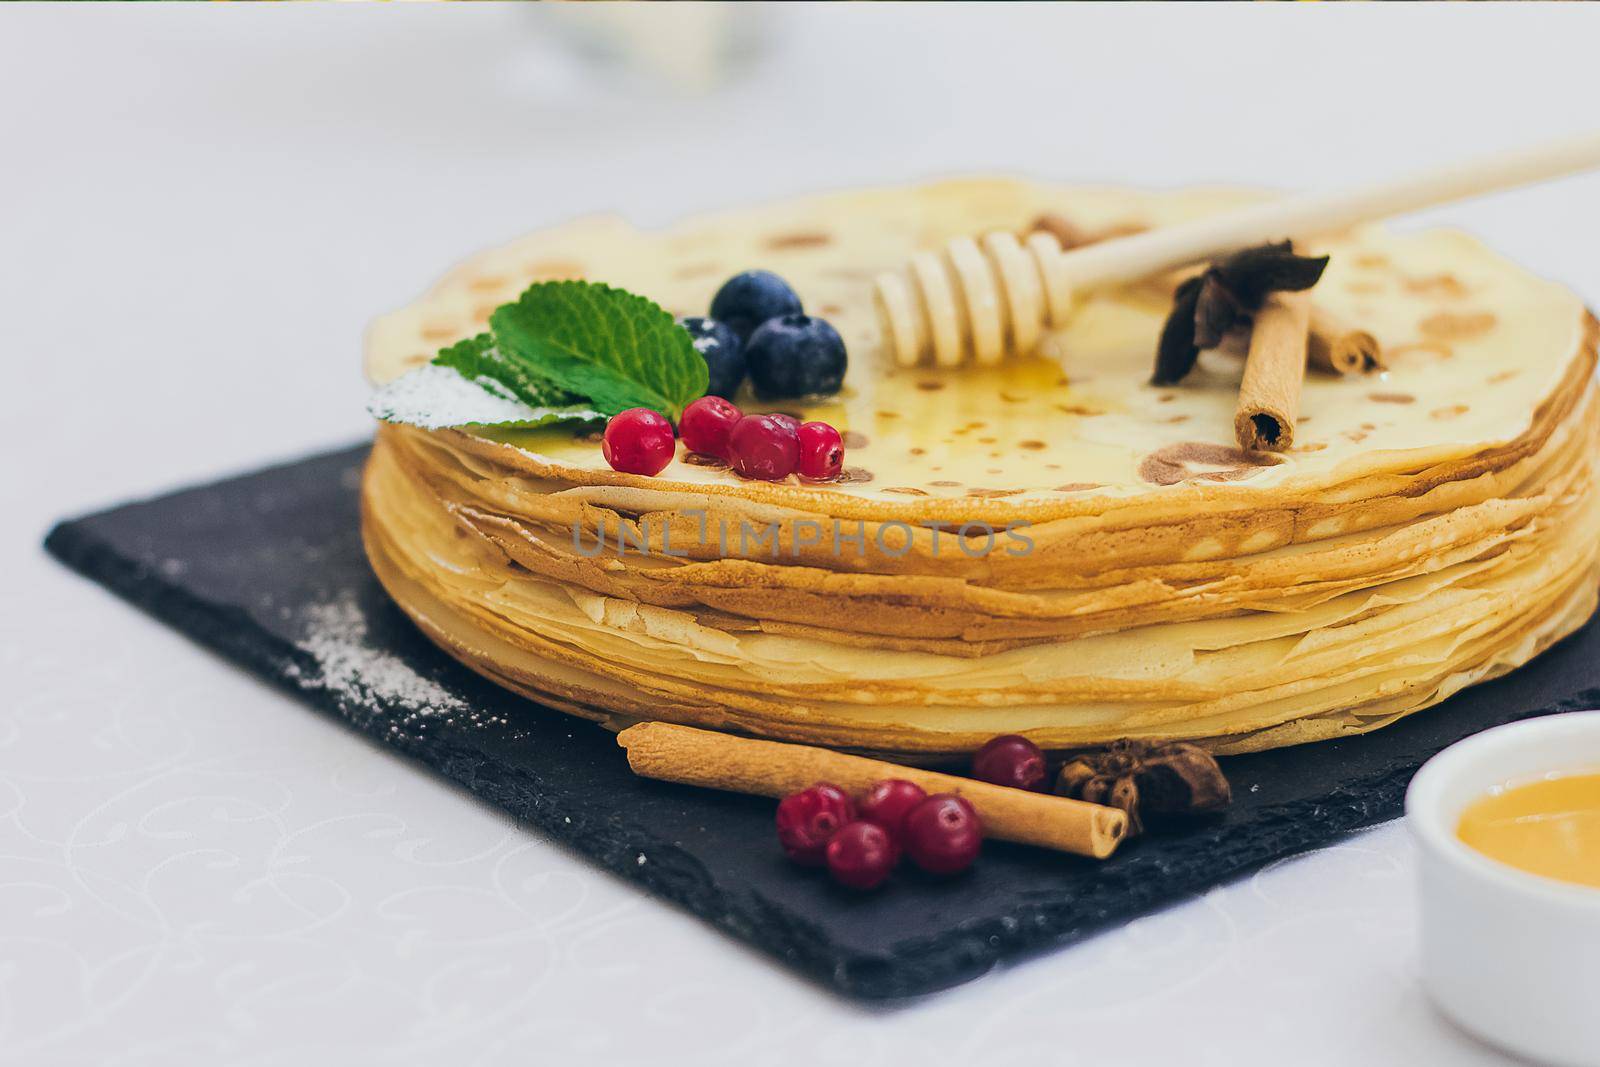 Plate of pancakes dripping with honey with cranberries and blueberries, cinnamon sticks. Shrovetide Maslenitsa Butter Week festival meal. Shrove Tuesday. Pancake day.